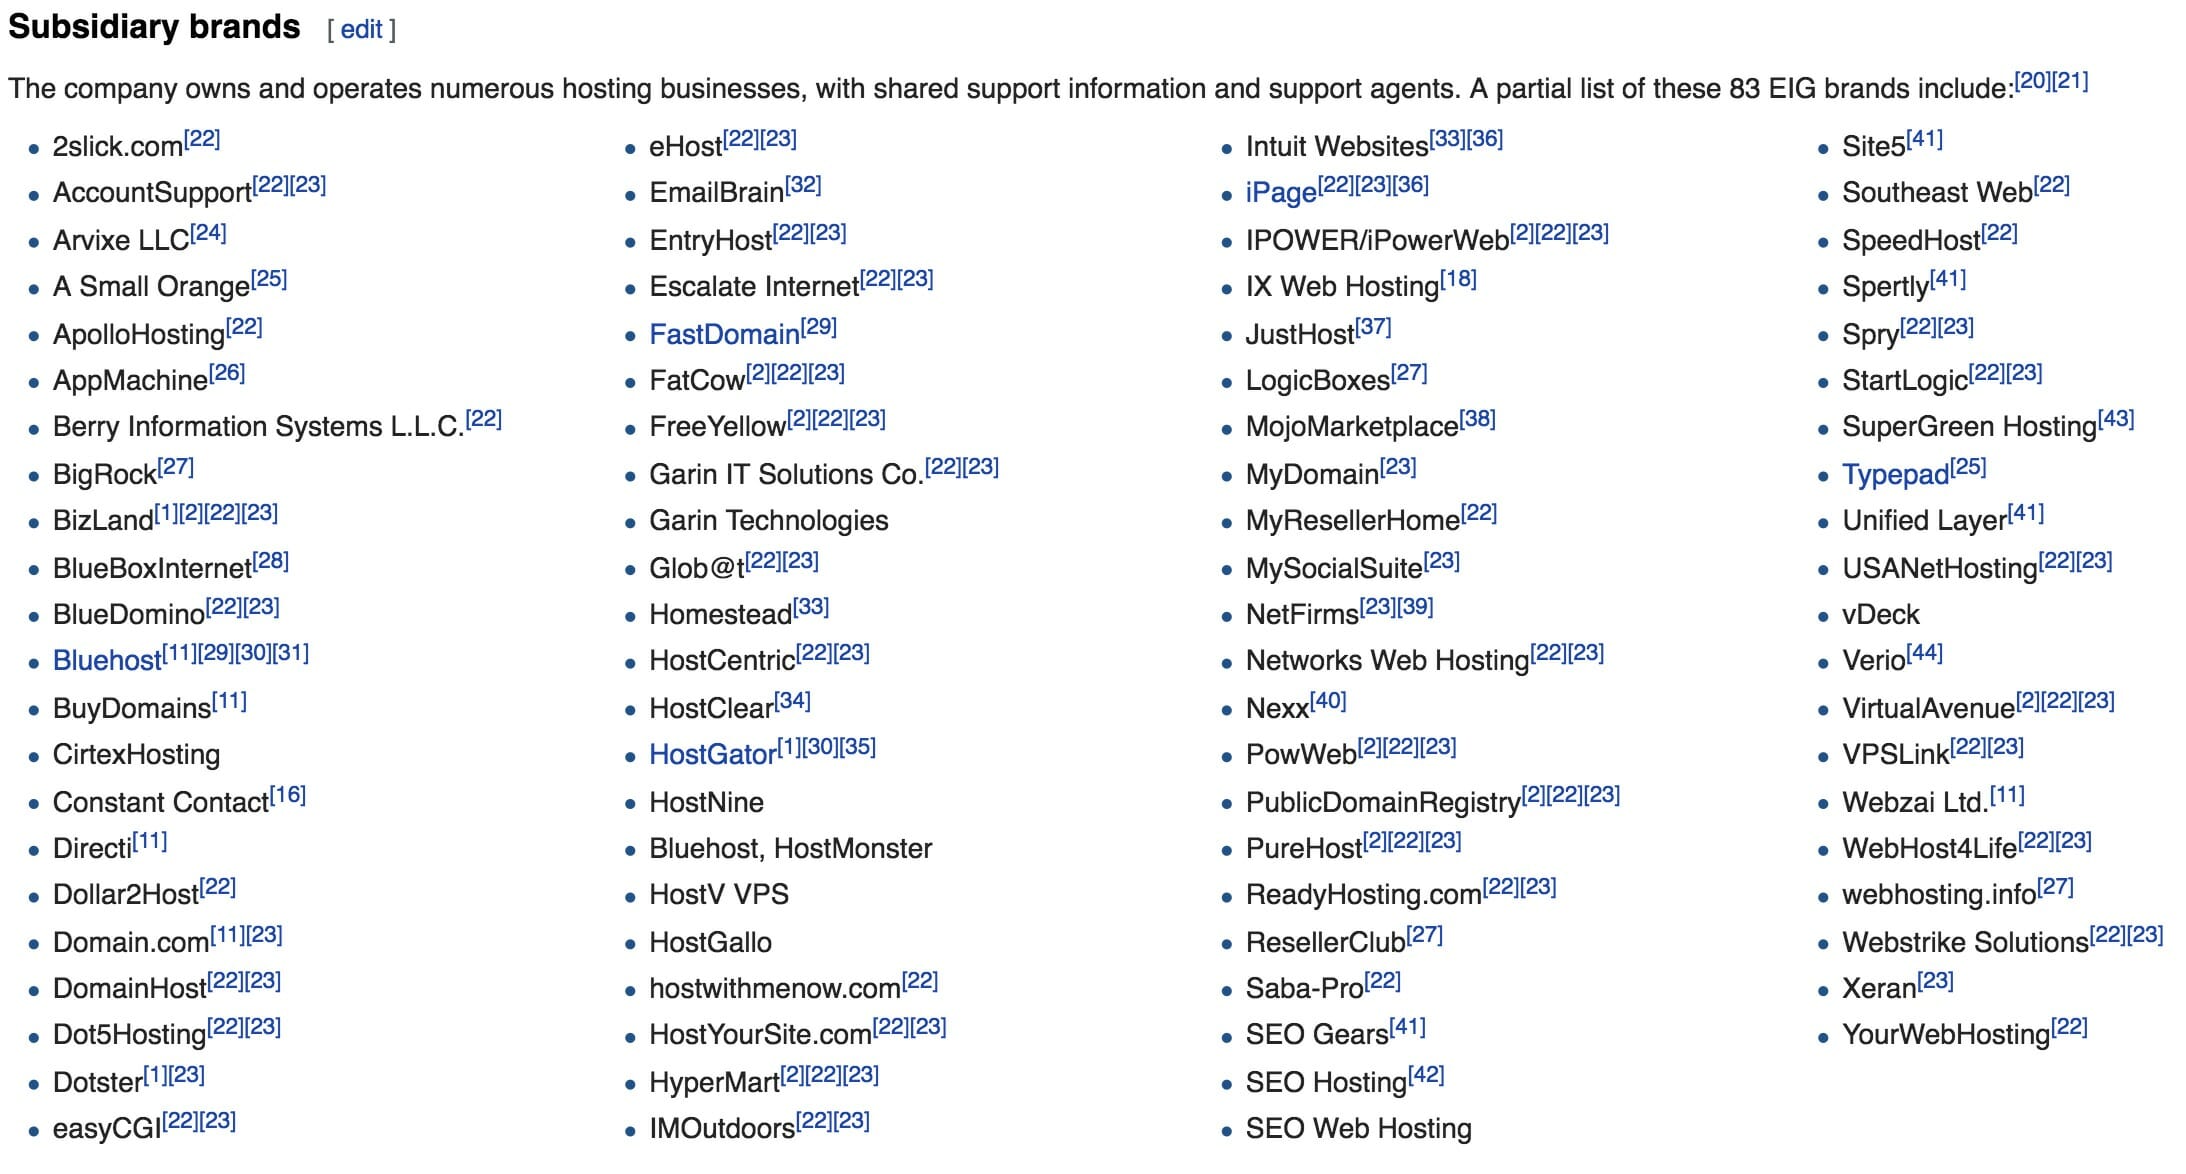 A partial list of 83 hosting companies that are owned and operated by Bluehost.